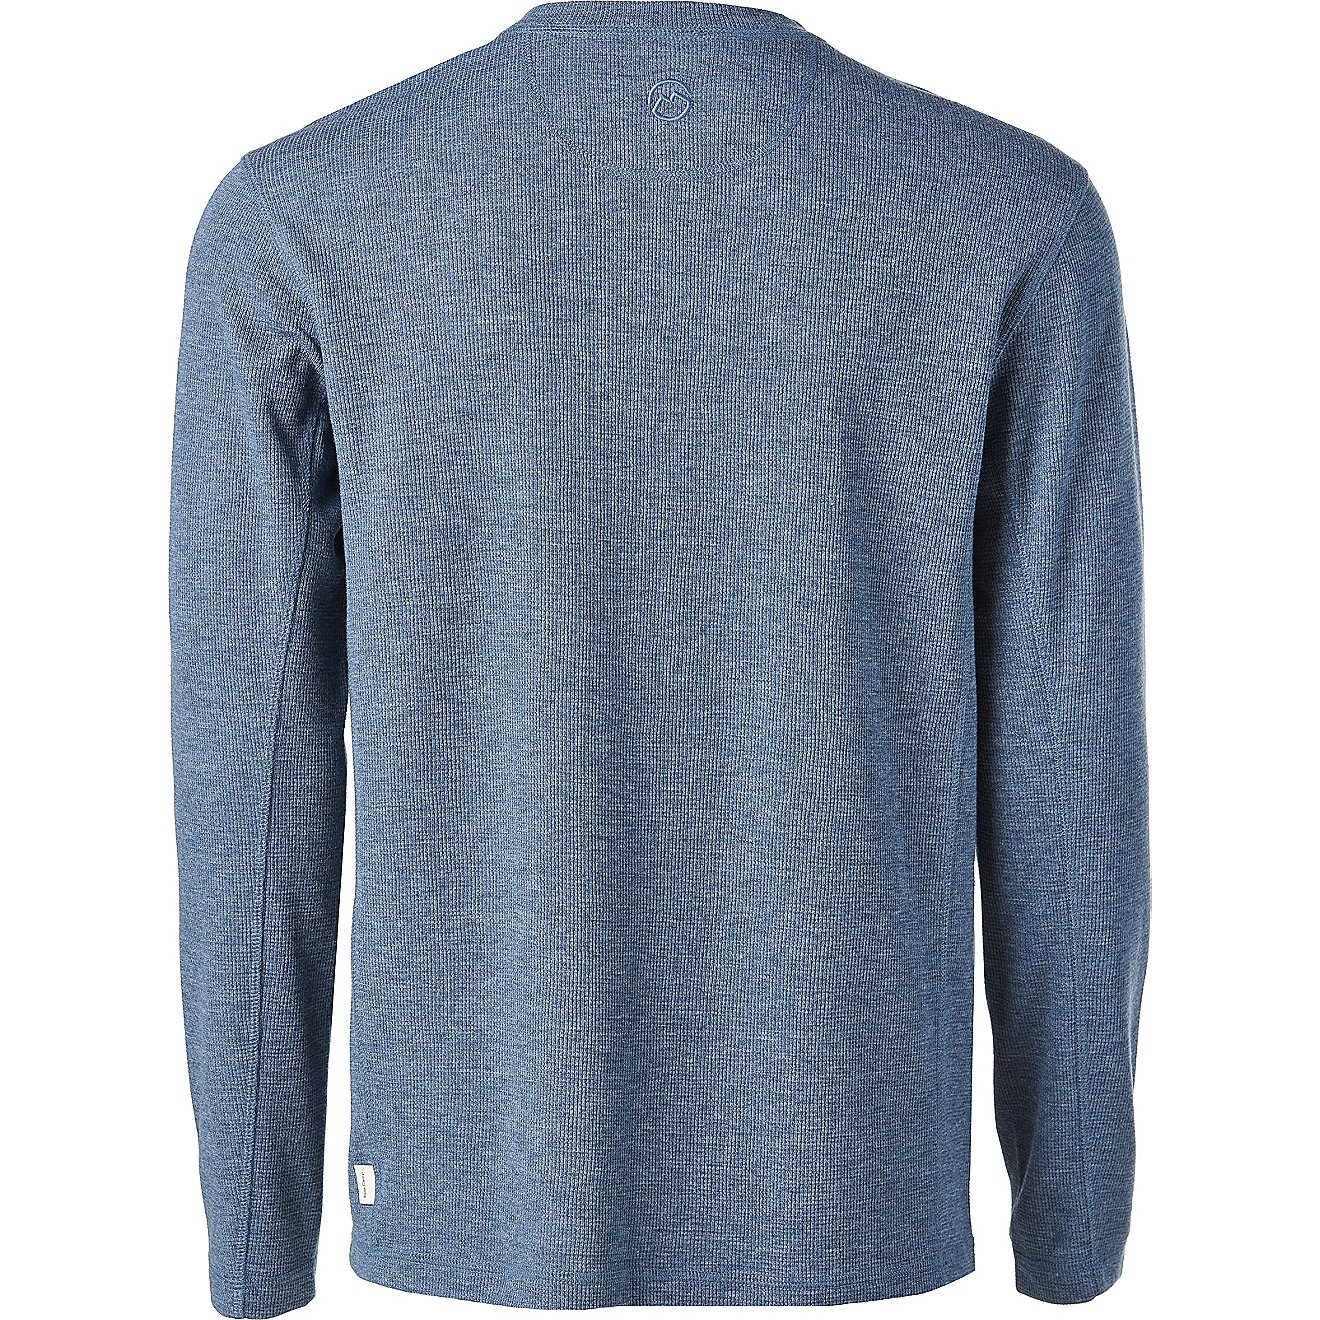 Magellan Outdoors Men's Base Camp Thermal Heathered Long Sleeve Crew Top                                                         - view number 2